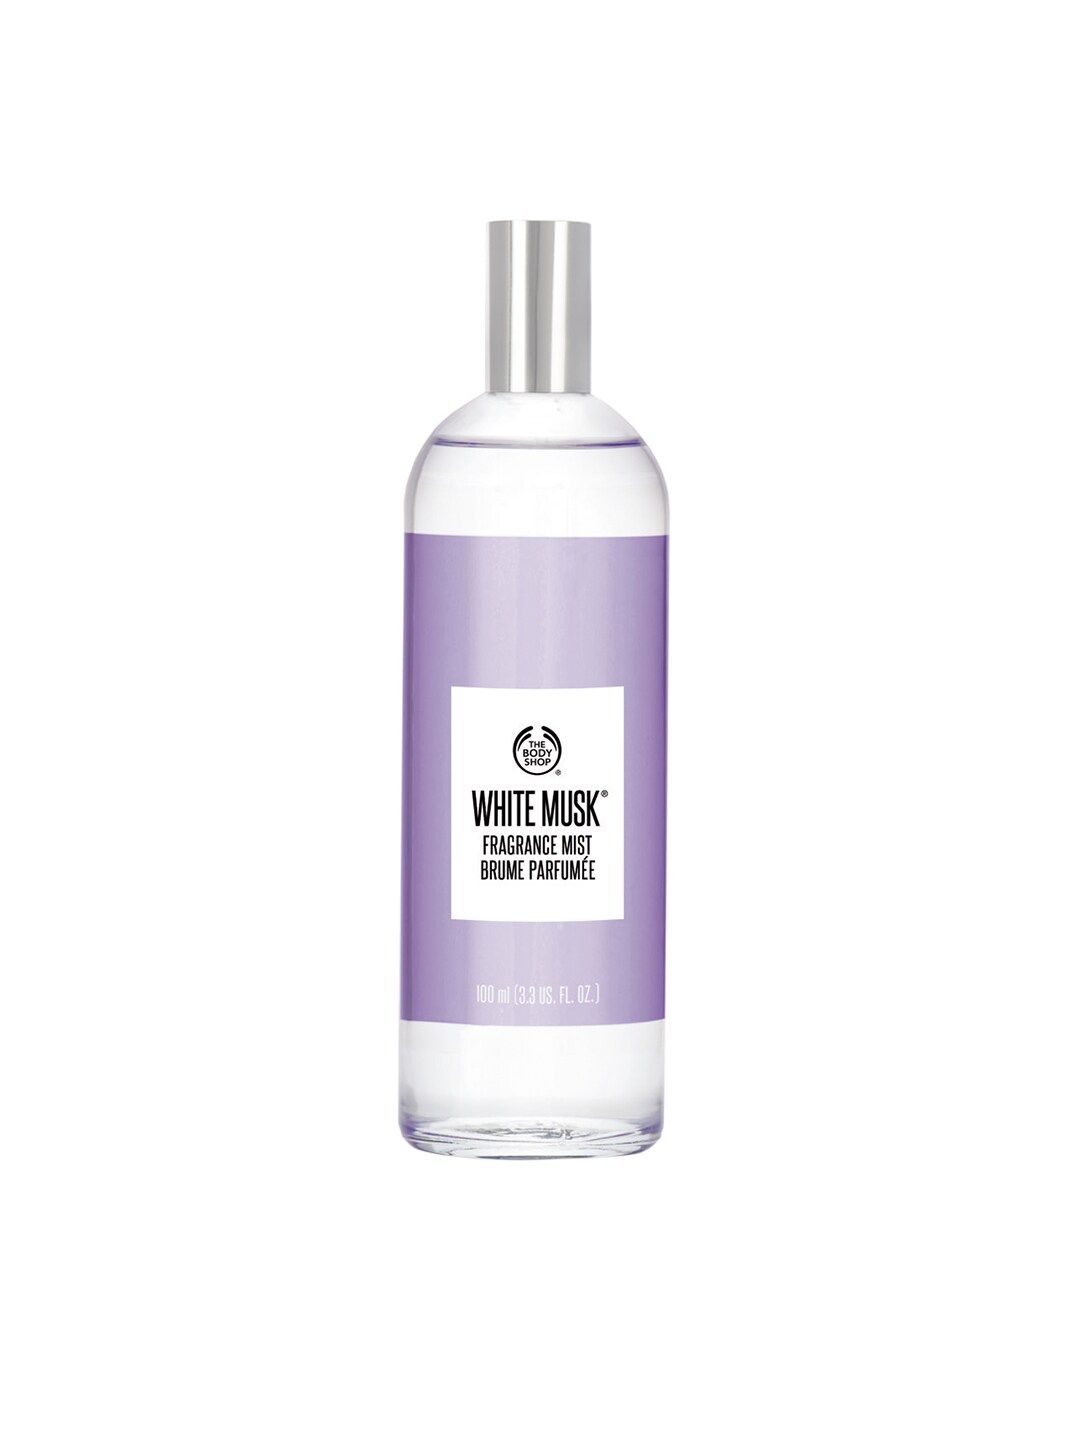 THE BODY SHOP White Musk Chiffon Sheer Fragrance Body Mist 100 ml Price in India